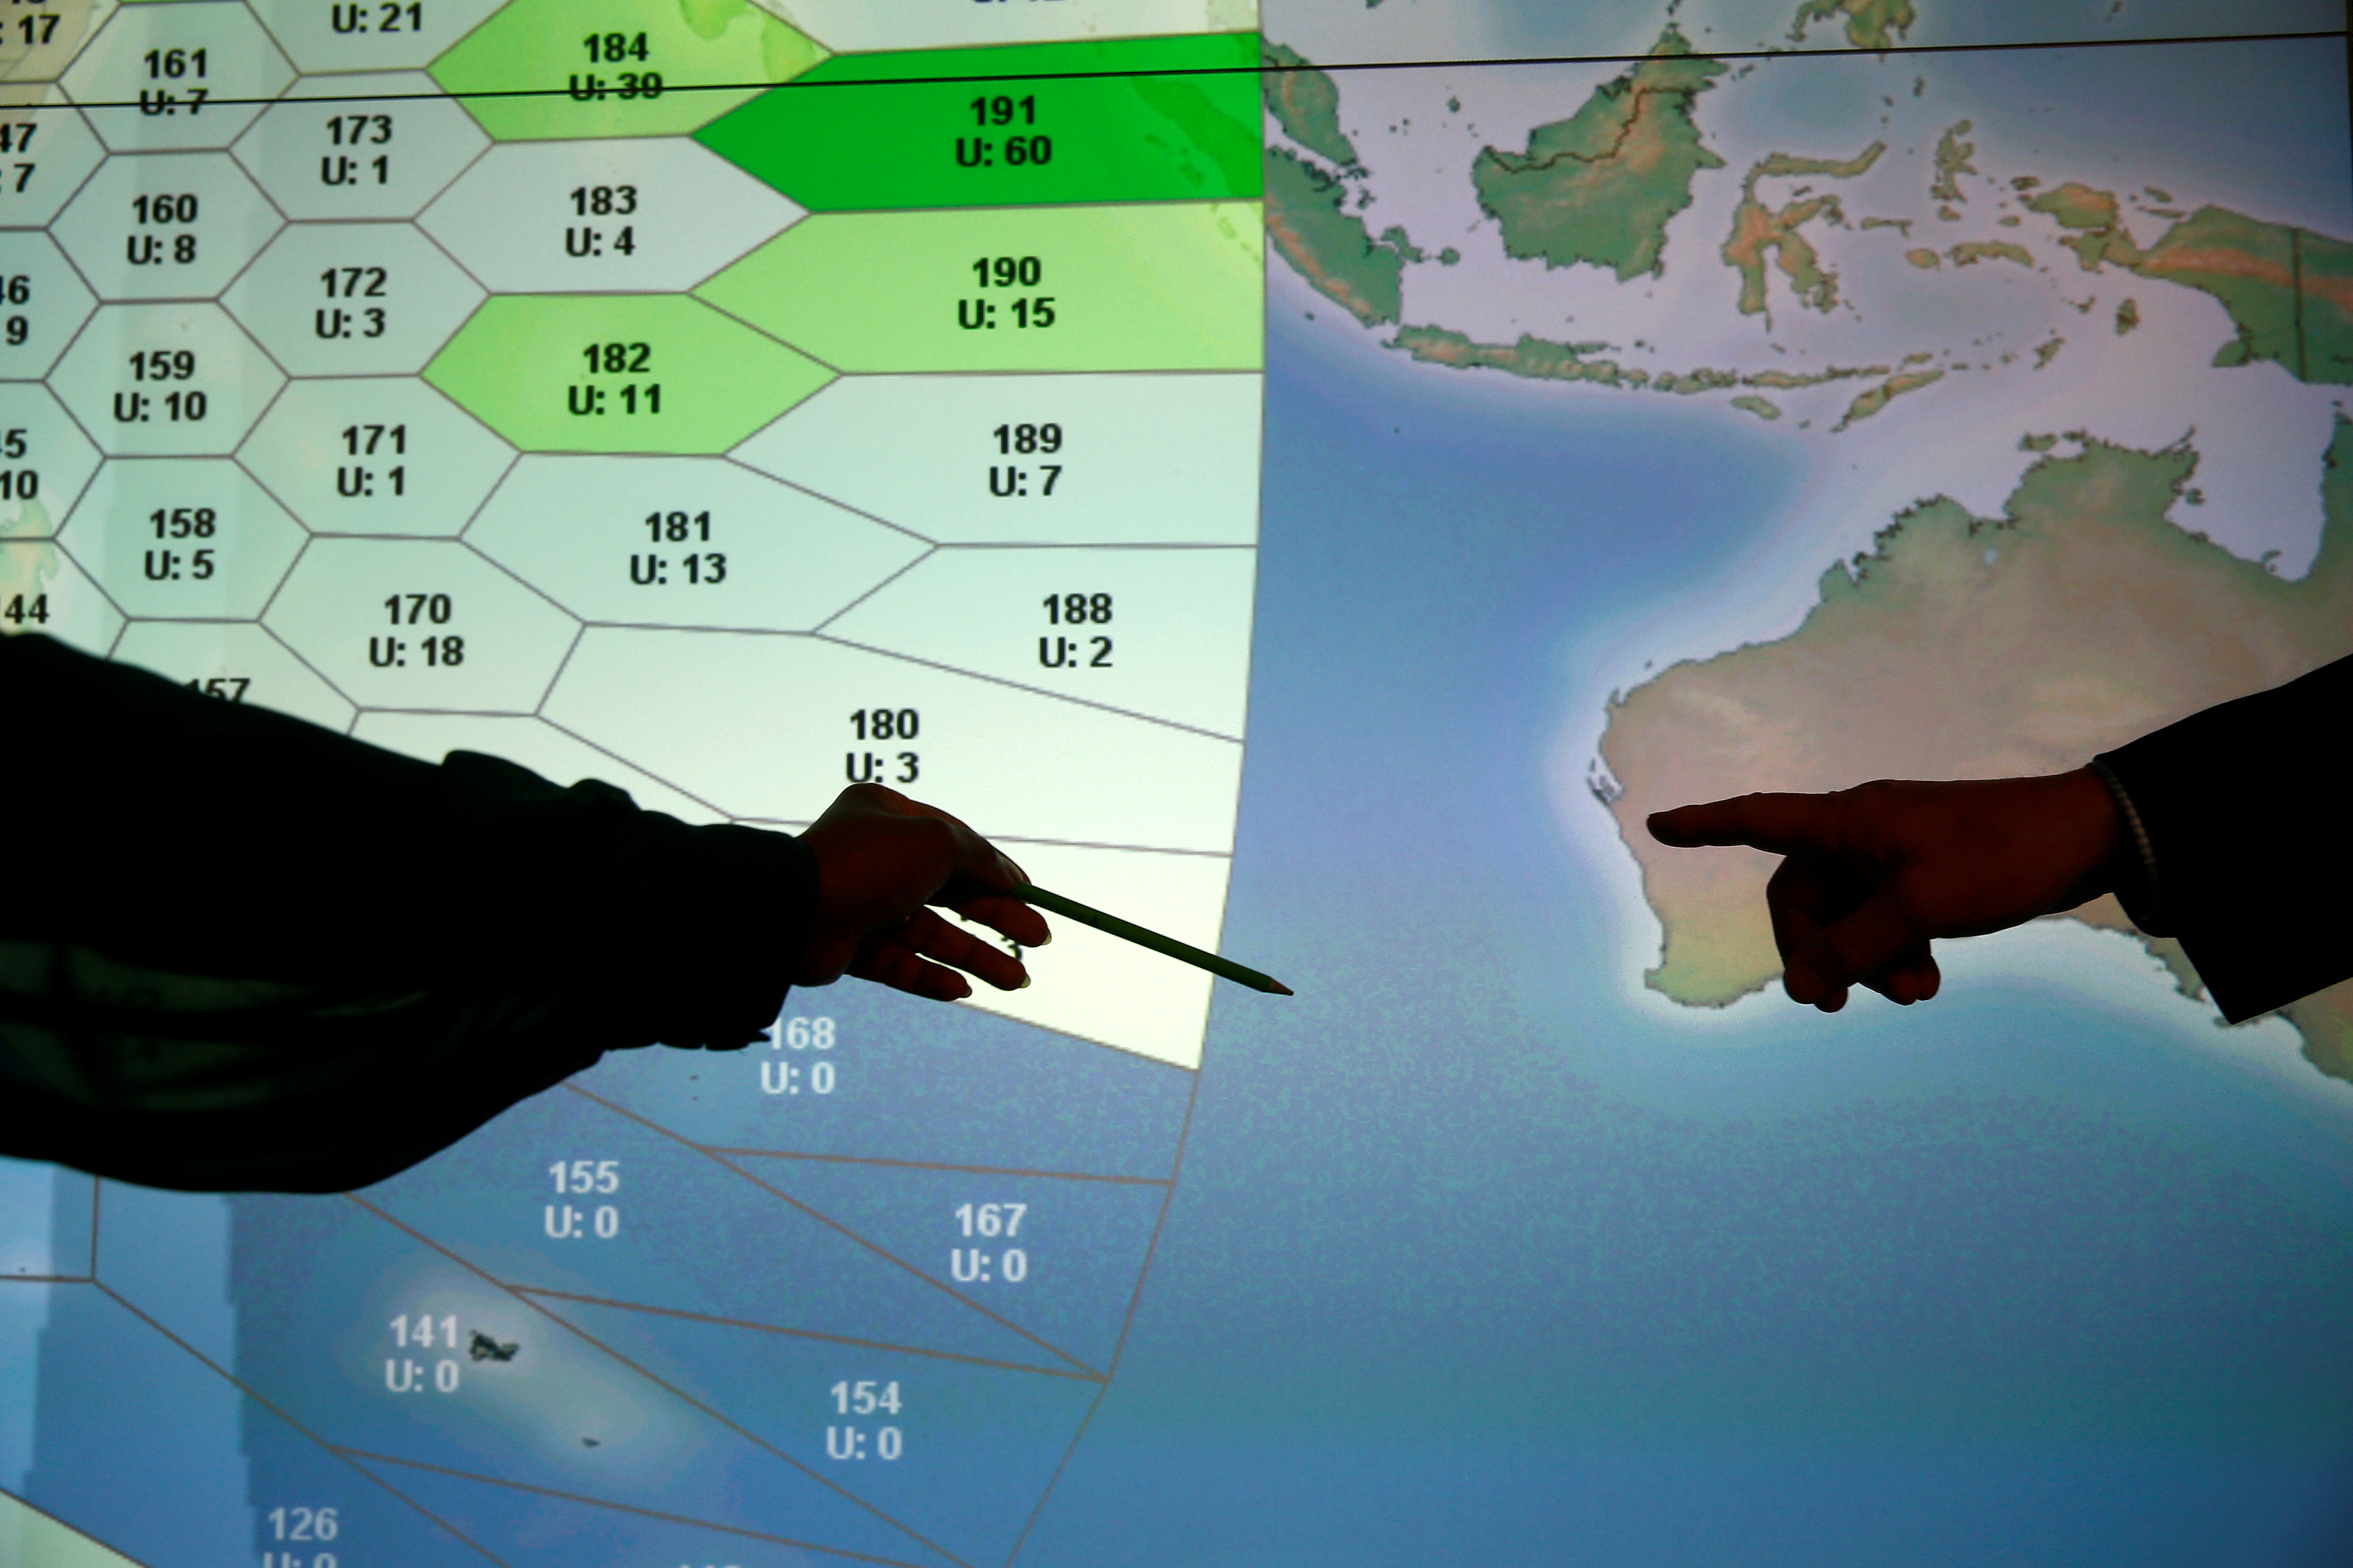 Member of staff at satellite communications company Inmarsat point to a section of the screen showing the southern Indian Ocean to the west of Australia, at their headquarters in London, Britain, March 25, 2014. REUTERS/Andrew Winning/File Photo